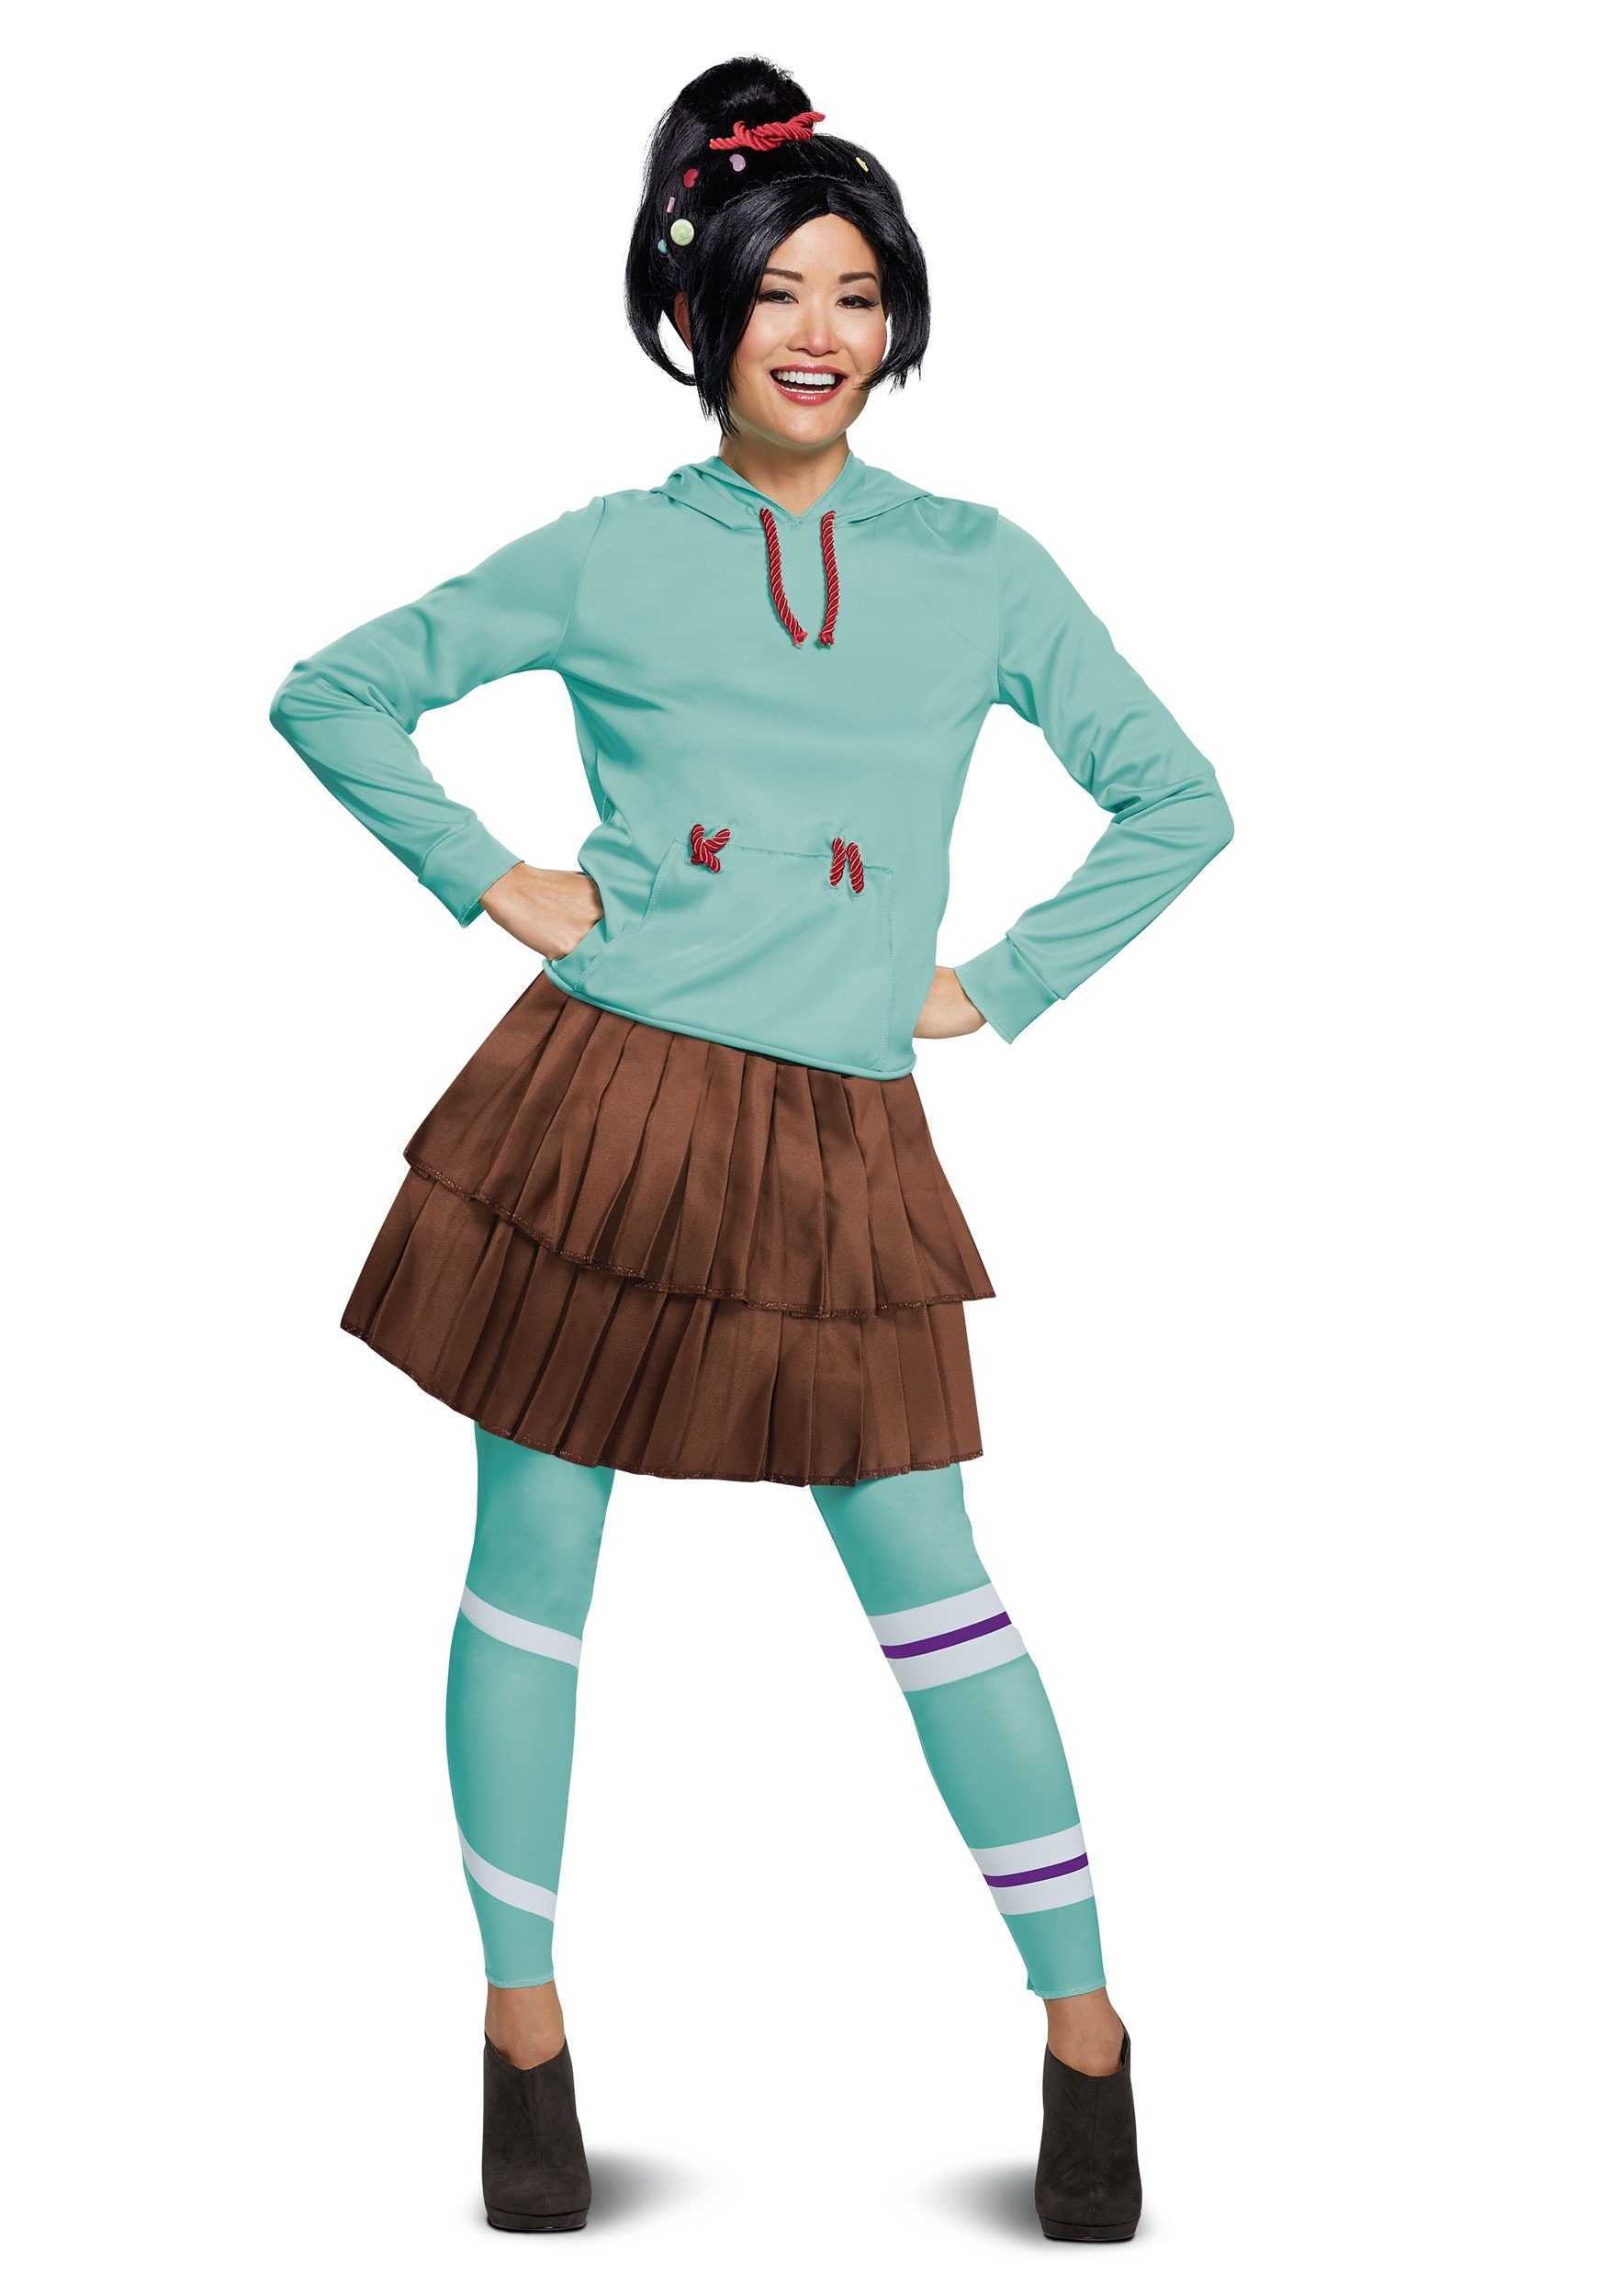 Image of Wreck It Ralph 2 Deluxe Vanellope Costume for Women ID DI67208-S